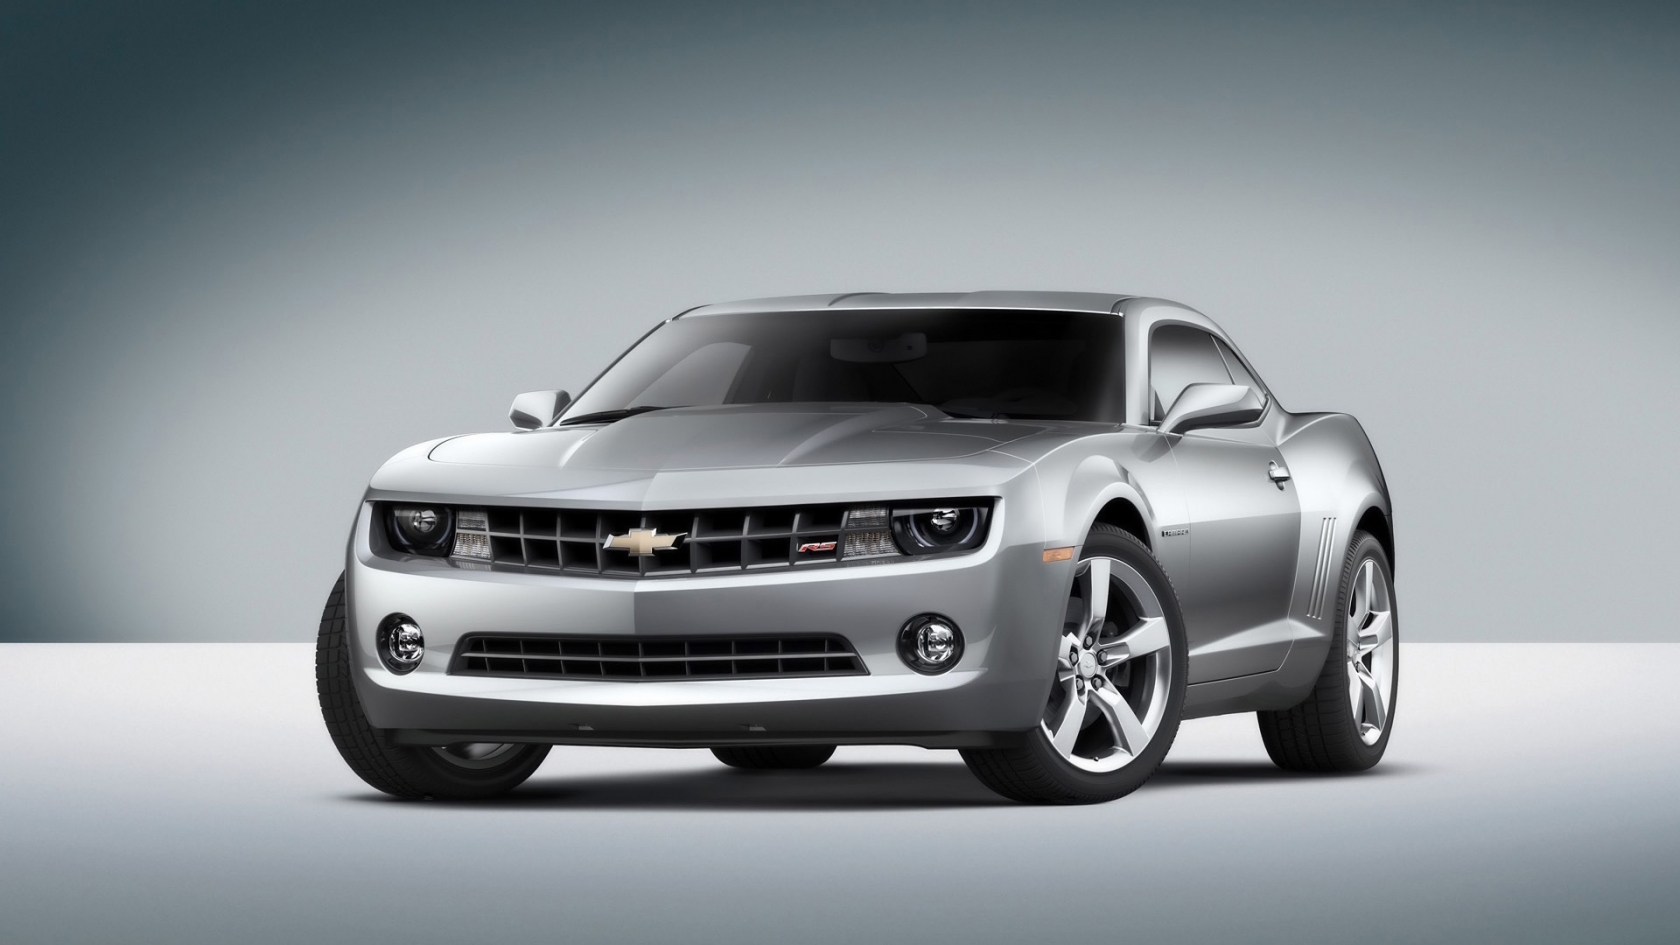 Chevrolet Camaro RS 2010 Grey Front Angle for 1680 x 945 HDTV resolution